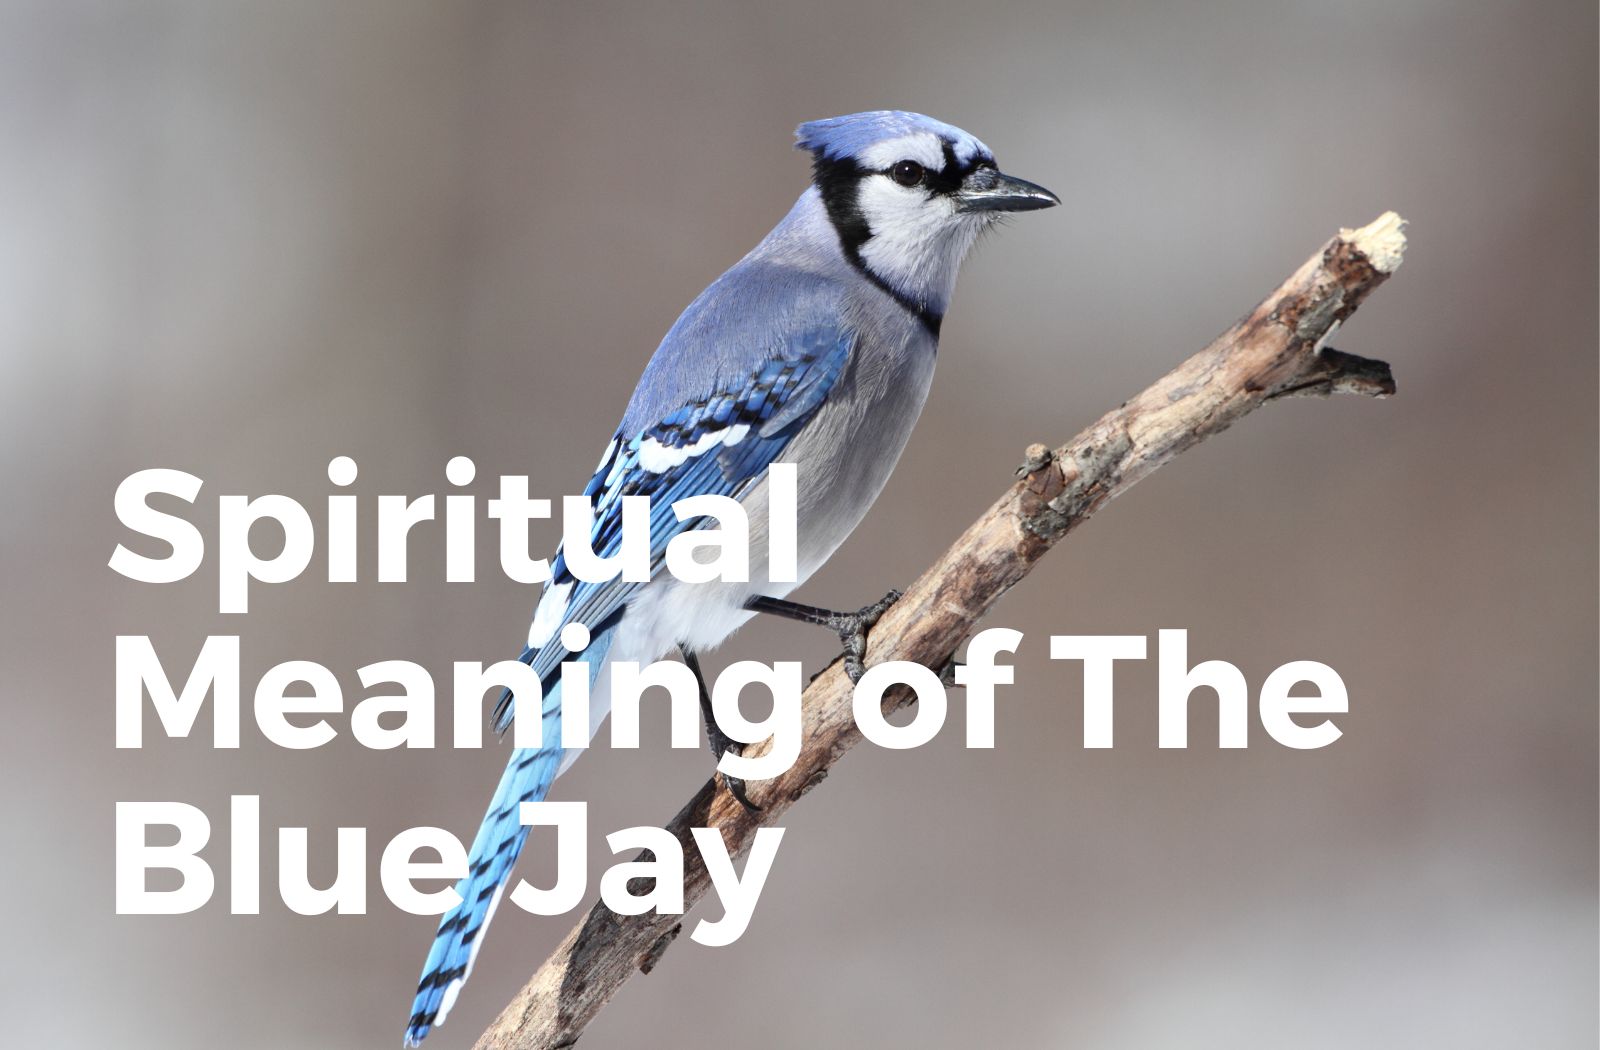 Spiritual meaning of the blue jay